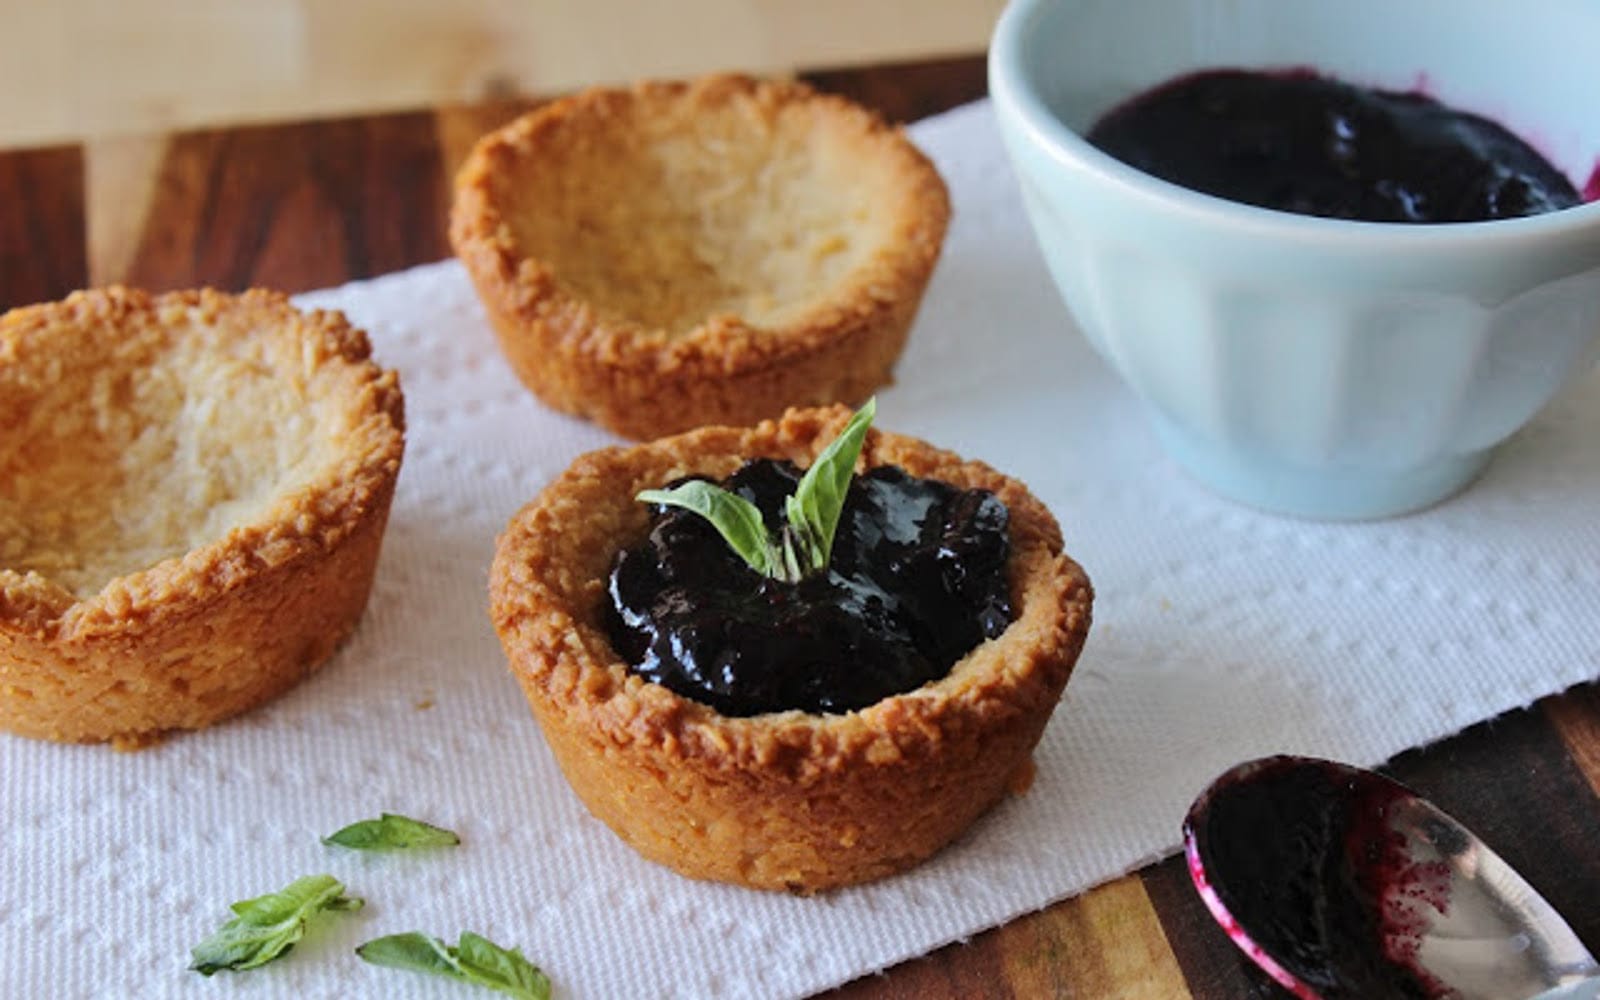 Lemony Macaroon Cups with Blueberry Basil Compote